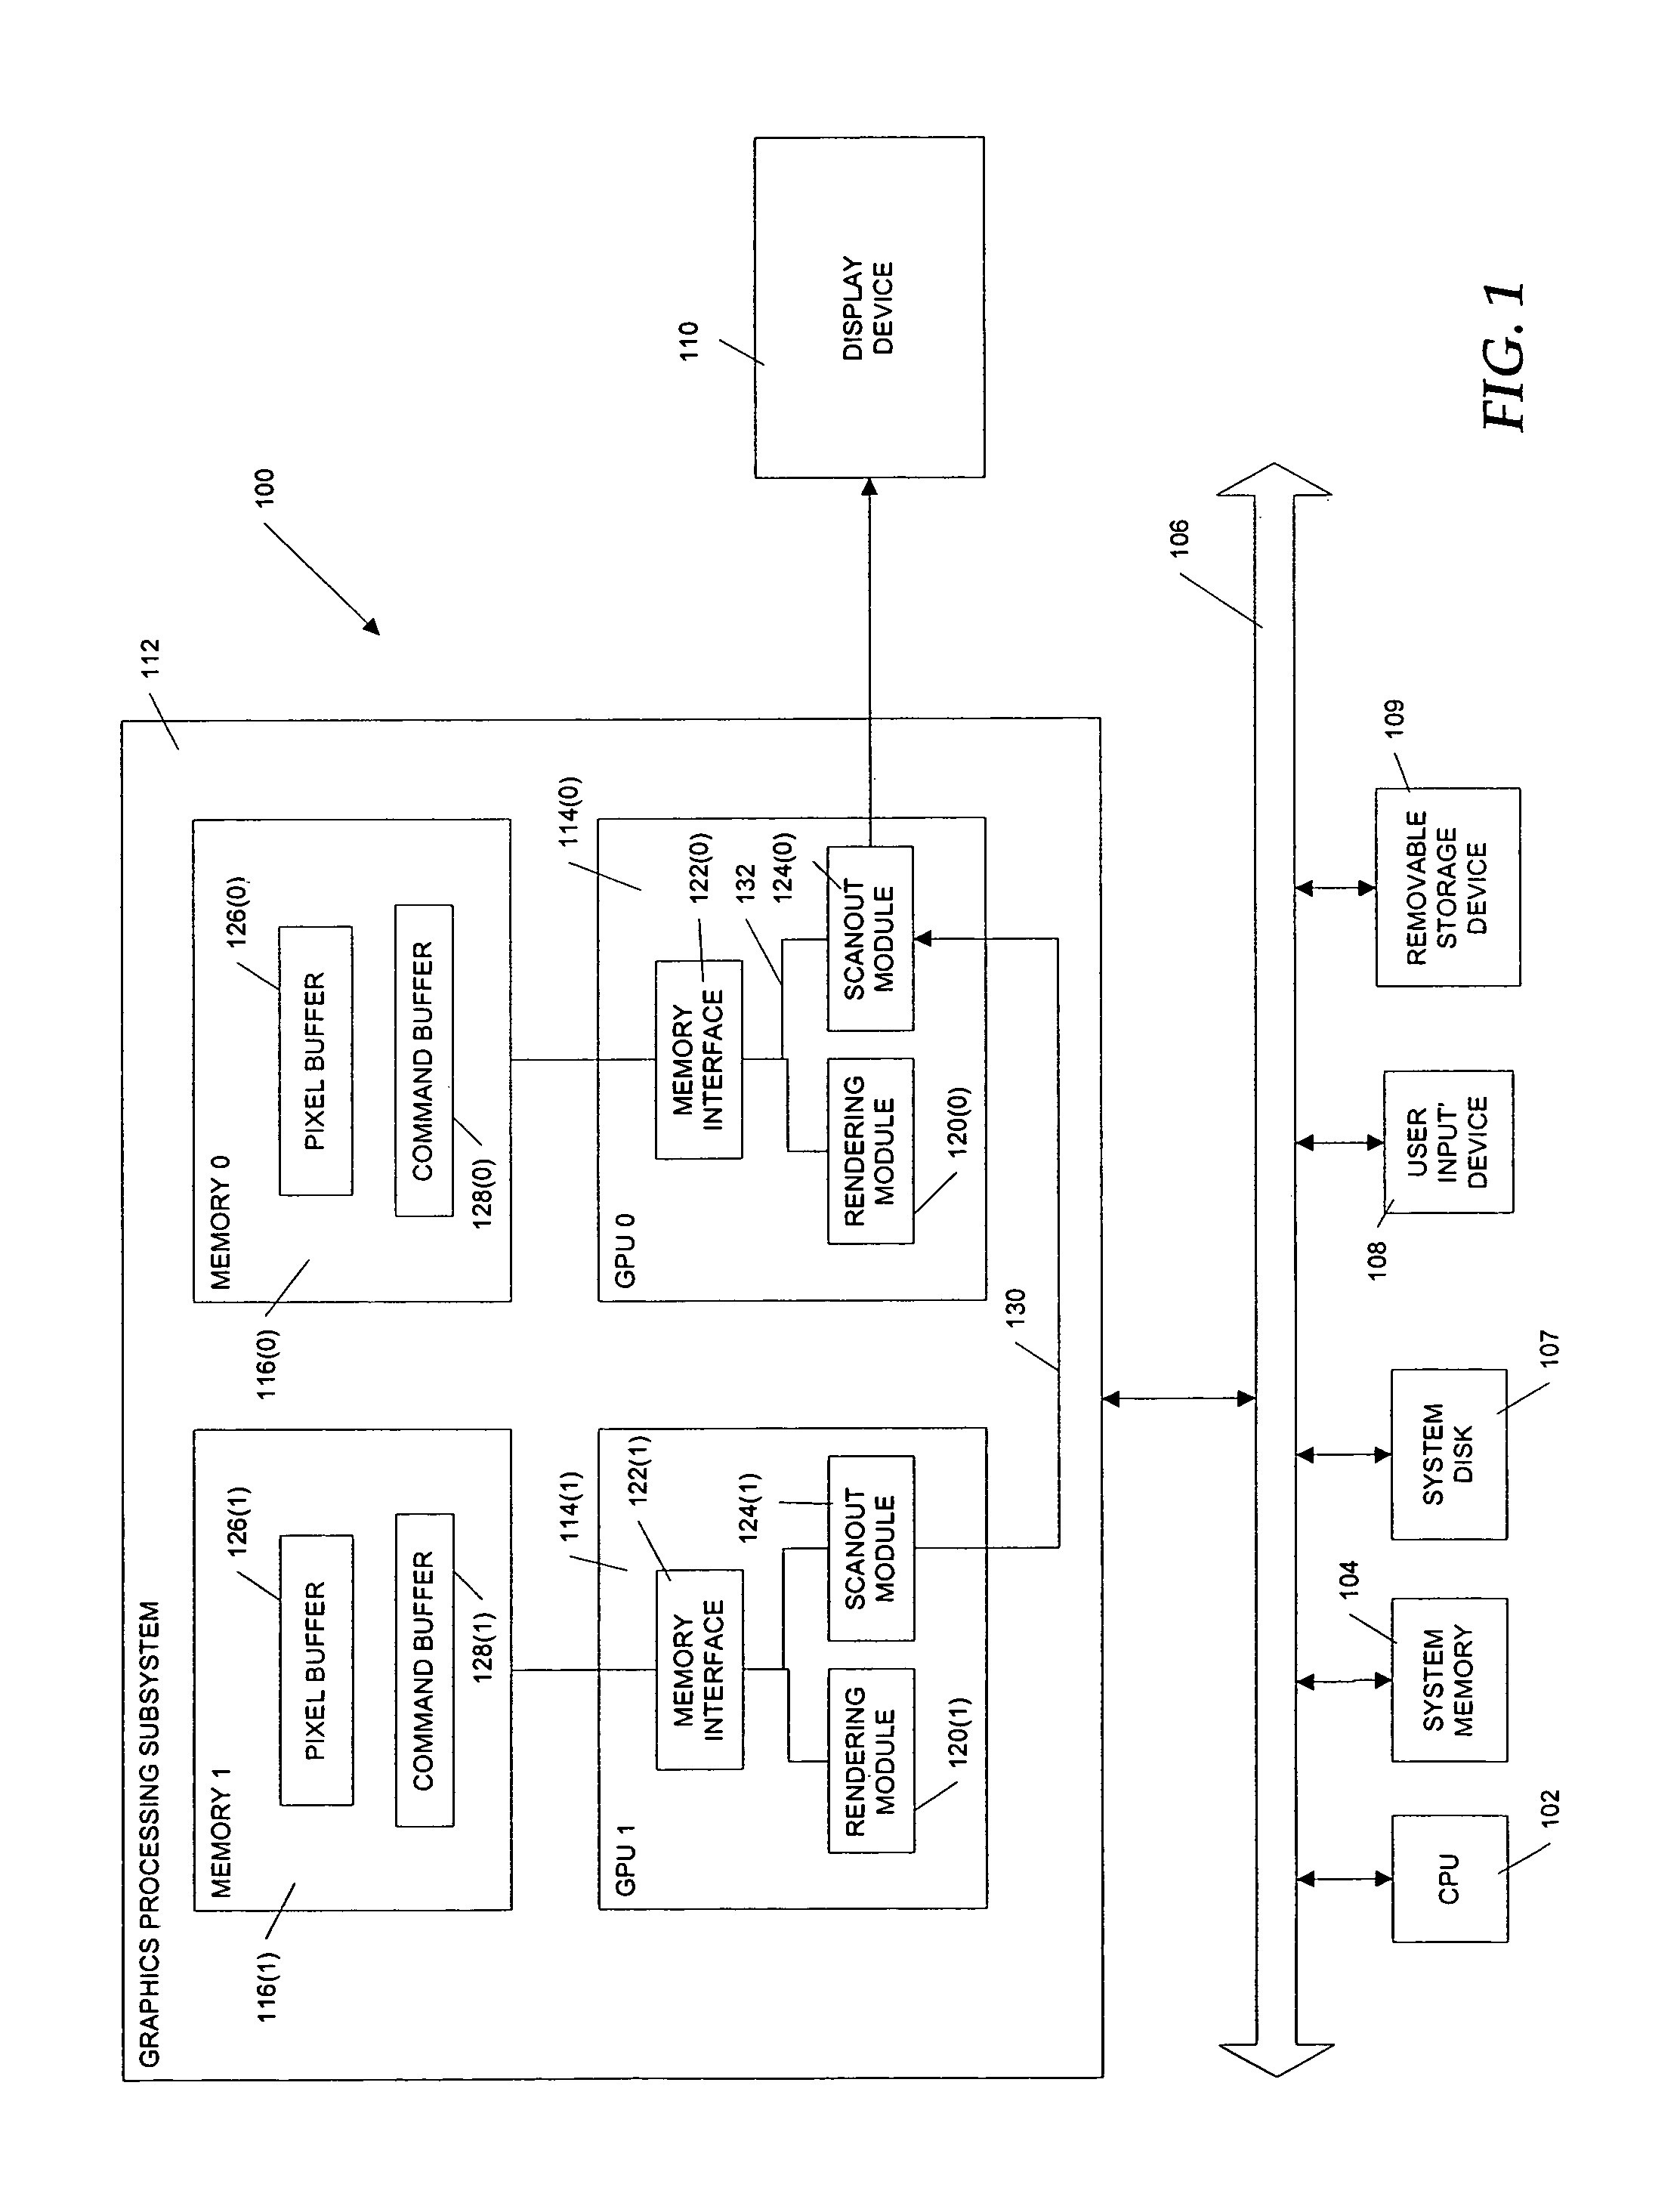 Coherence of displayed images for split-frame rendering in multi-processor graphics system